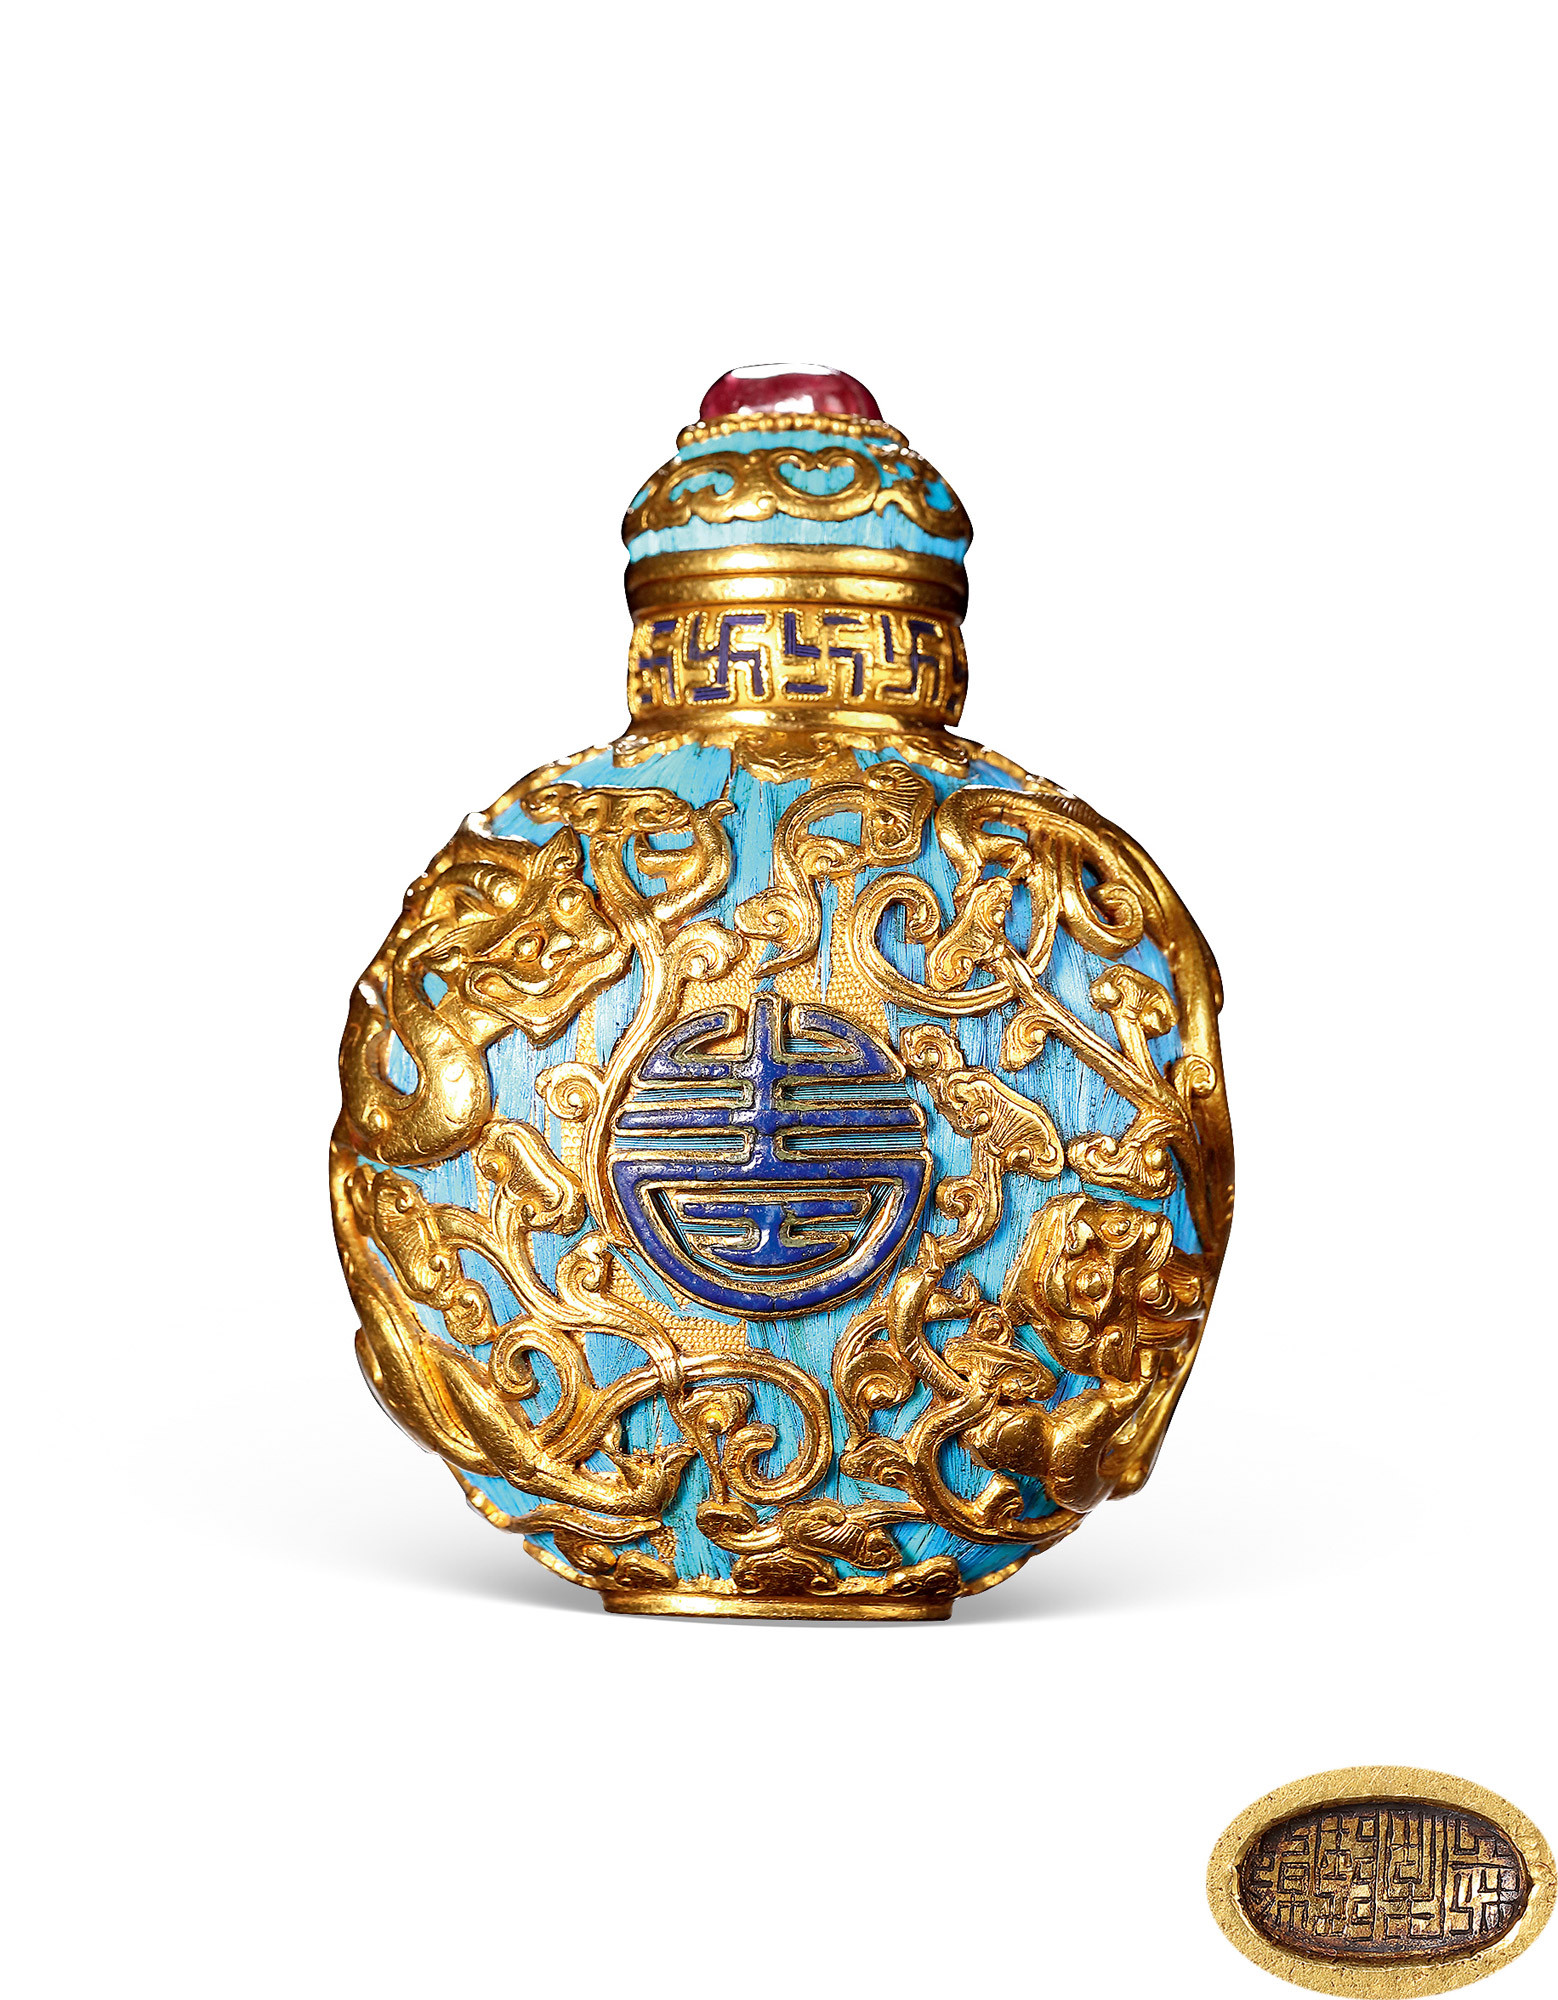 A GOLD KINGFISHER SNUFF BOTTLE WITH‘CHI-DRAGON’ DESIGN